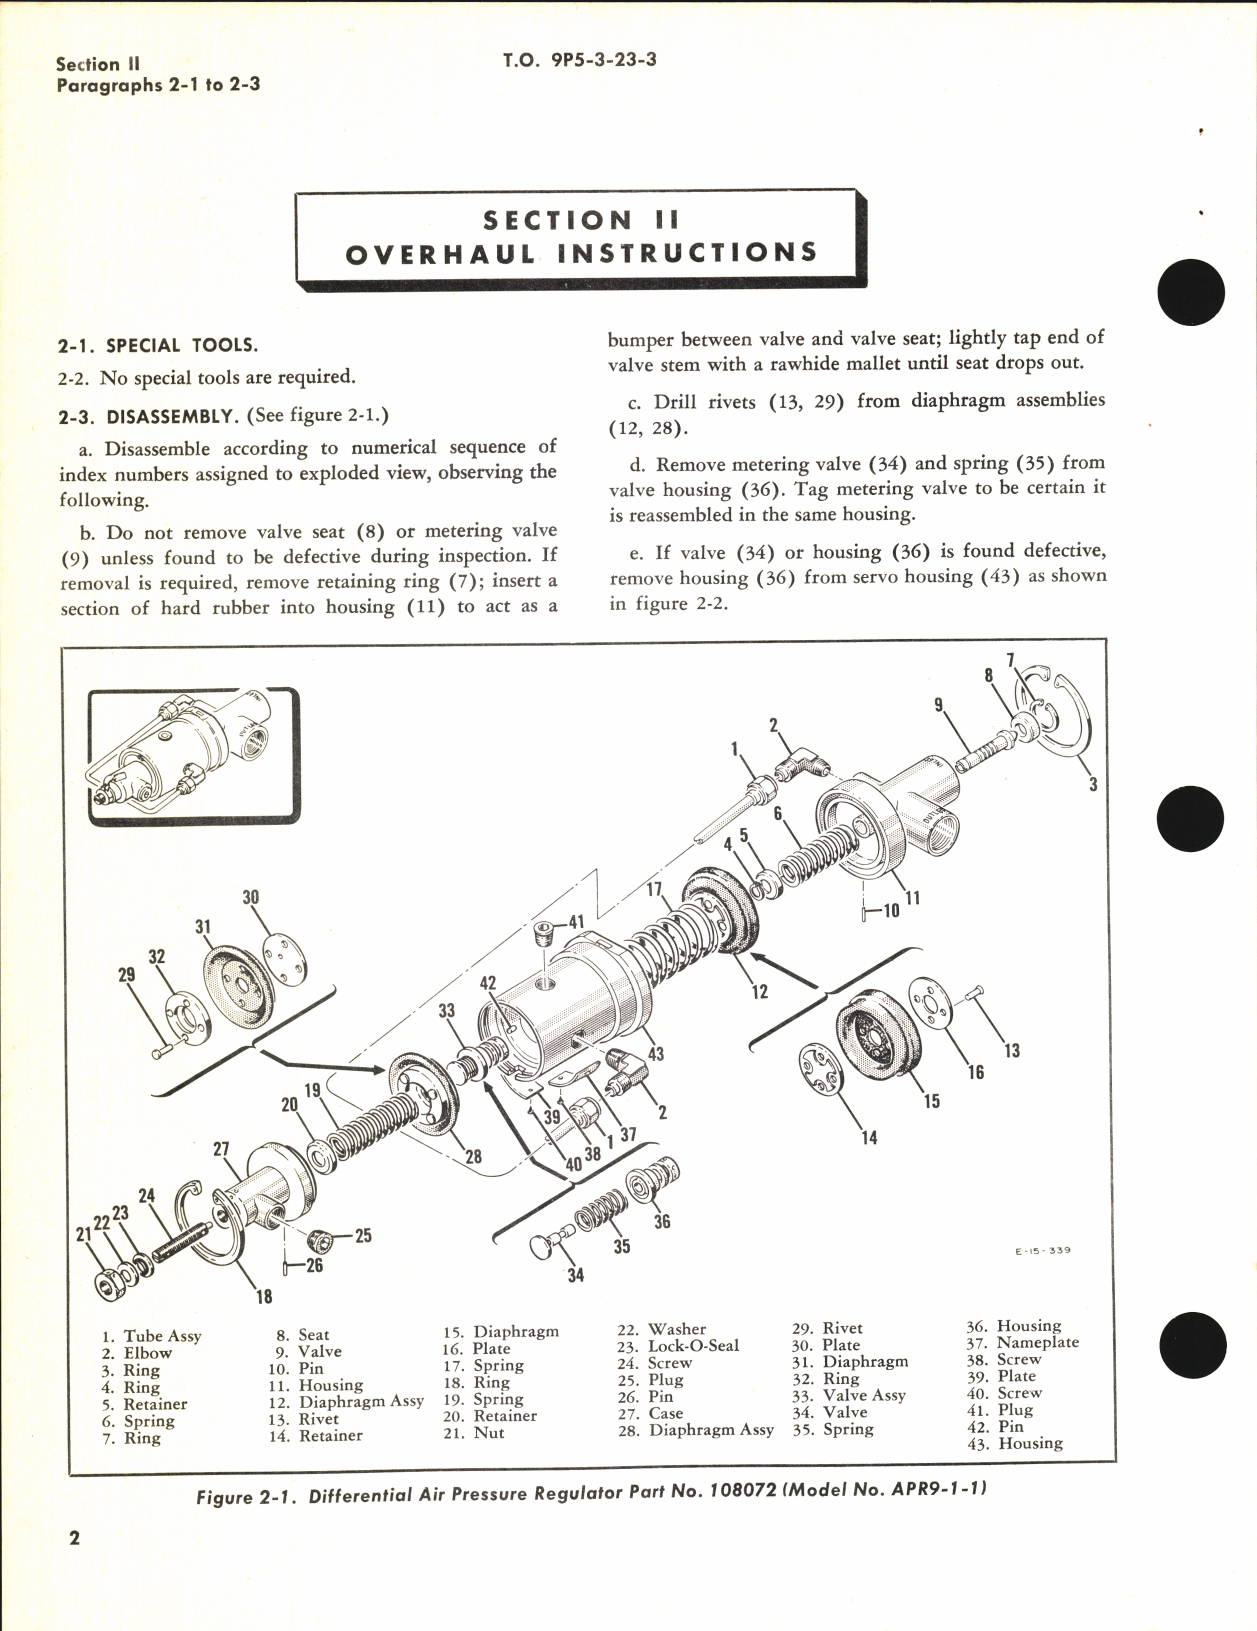 Sample page 6 from AirCorps Library document: Handbook of Overhaul Instructions for Air Pressure Regulators 